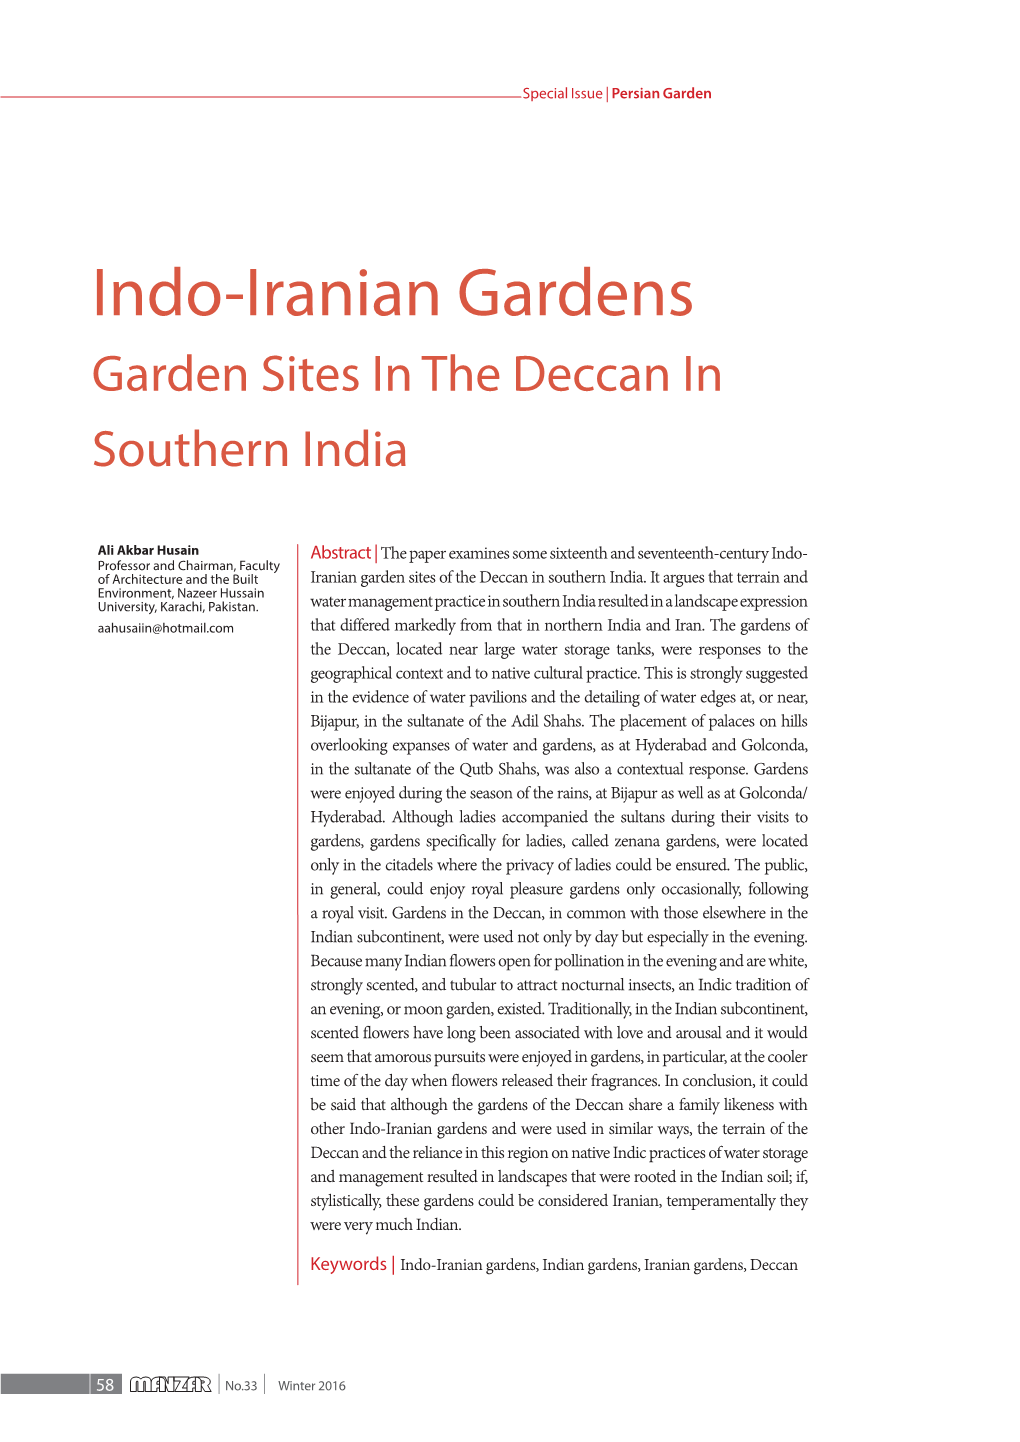 Indo-Iranian Gardens Garden Sites in the Deccan in Southern India